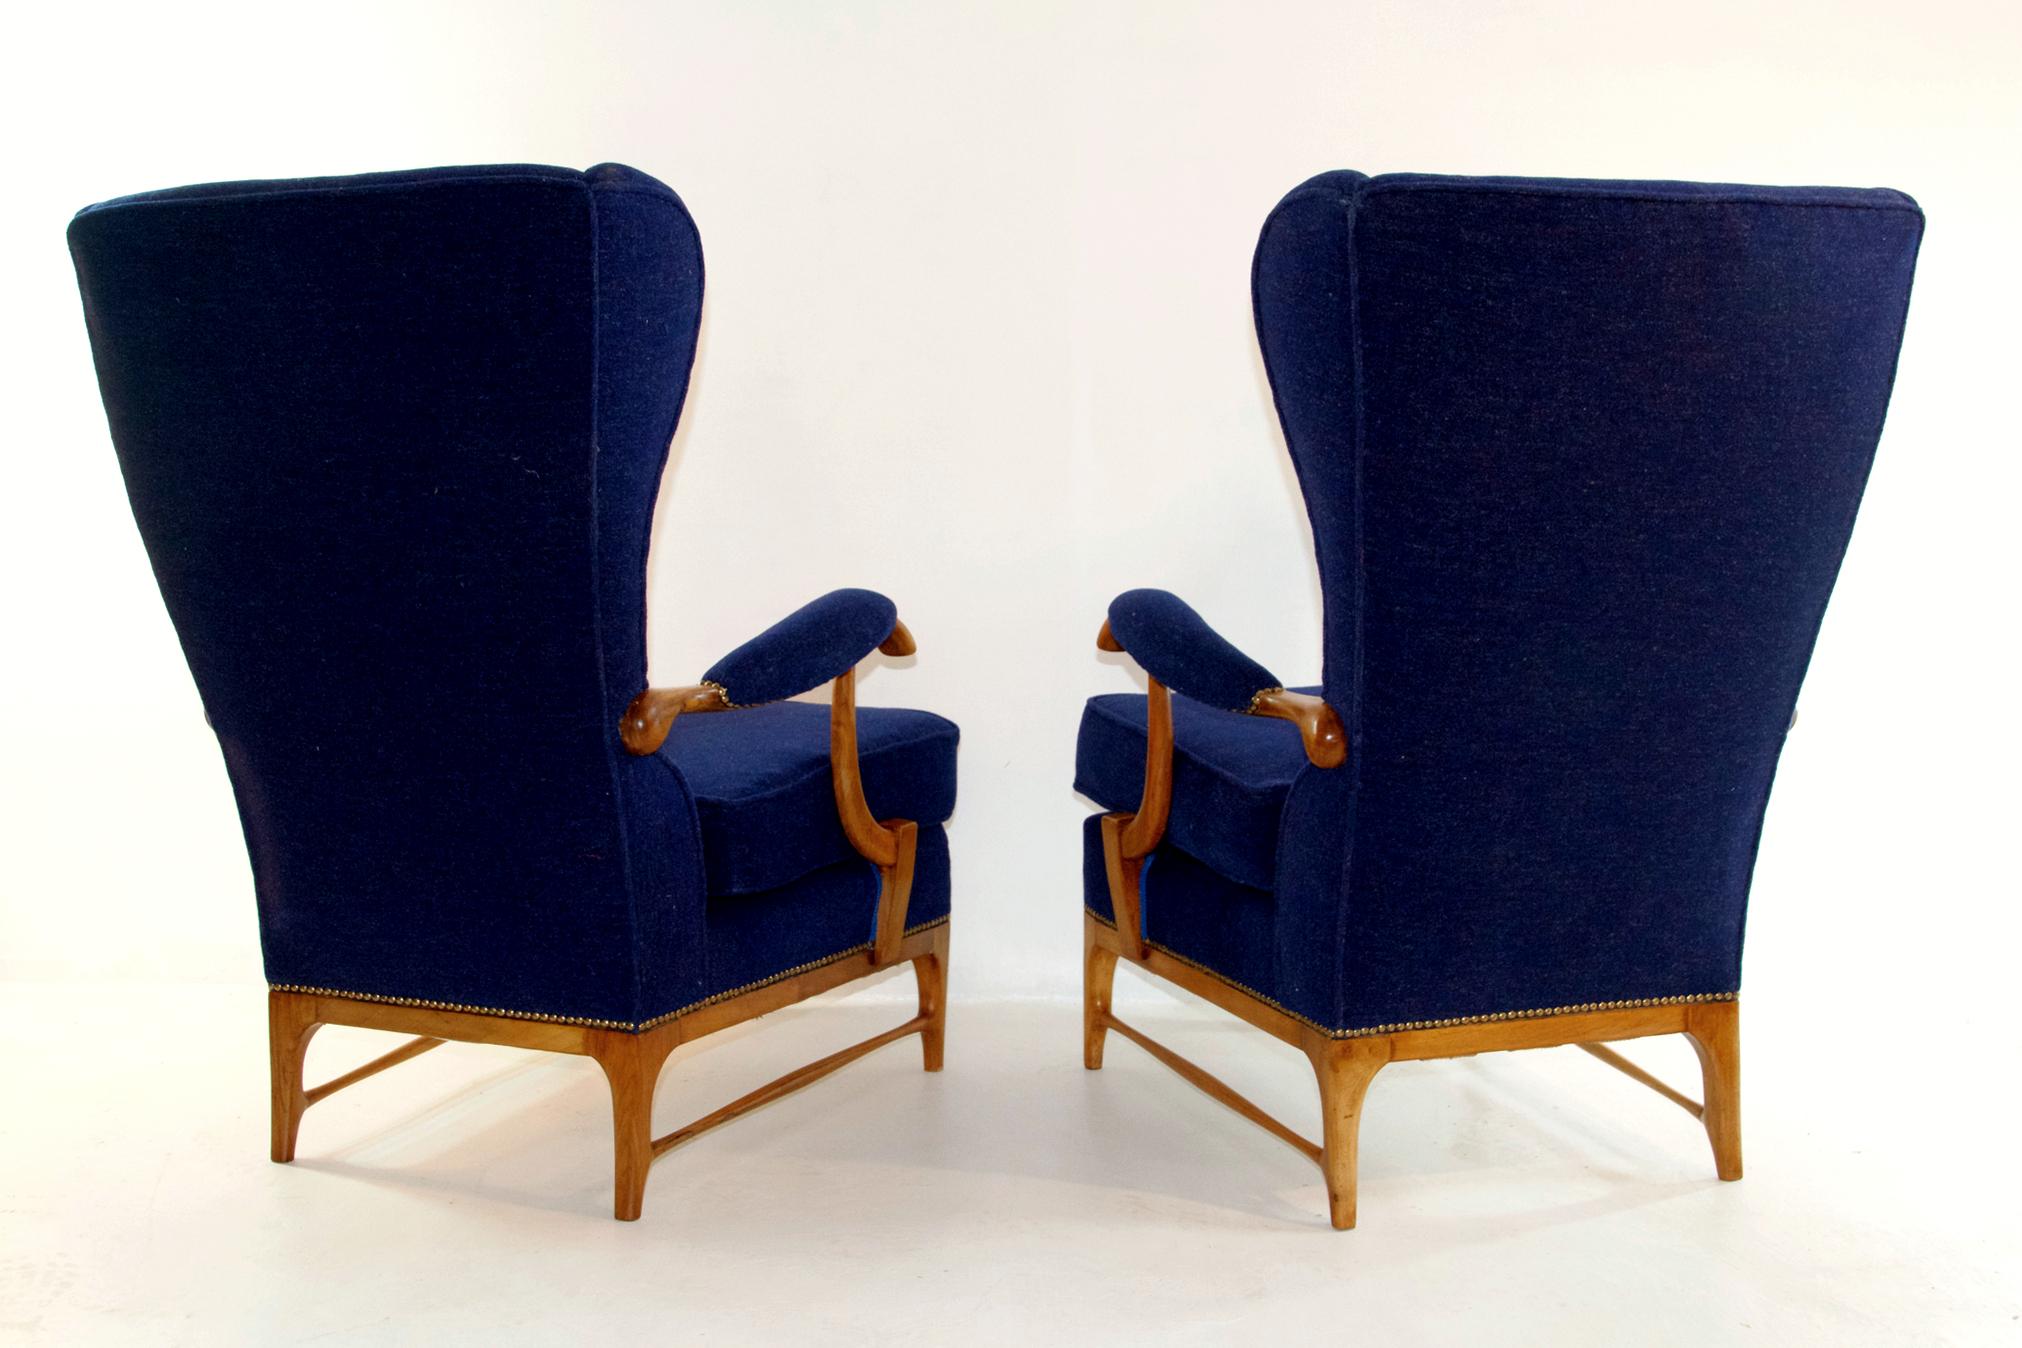 Italian Midcentury Pair of Armchairs in Walnut by Paolo Buffa for Framar Made in Italy For Sale